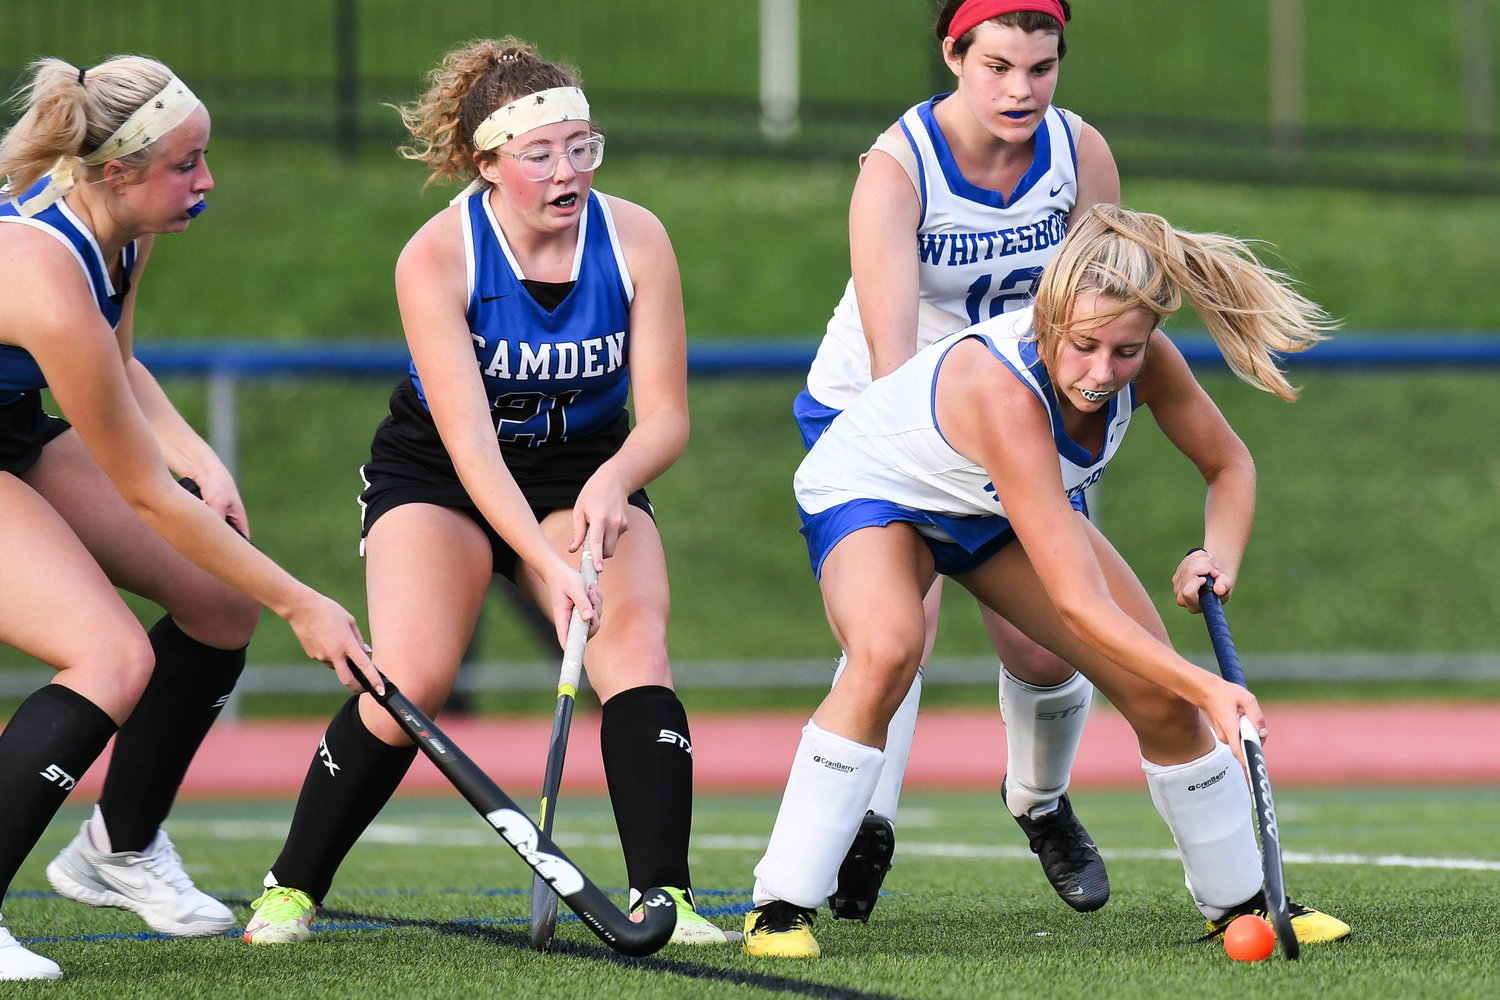 Whitesboro player Brianna DeHimer, right, moves the ball against Camden players Emily Bird, left, and Lillie Howe during the field hockey game on Wednesday. DeHimer scored in the game, but Camden won 2-1.